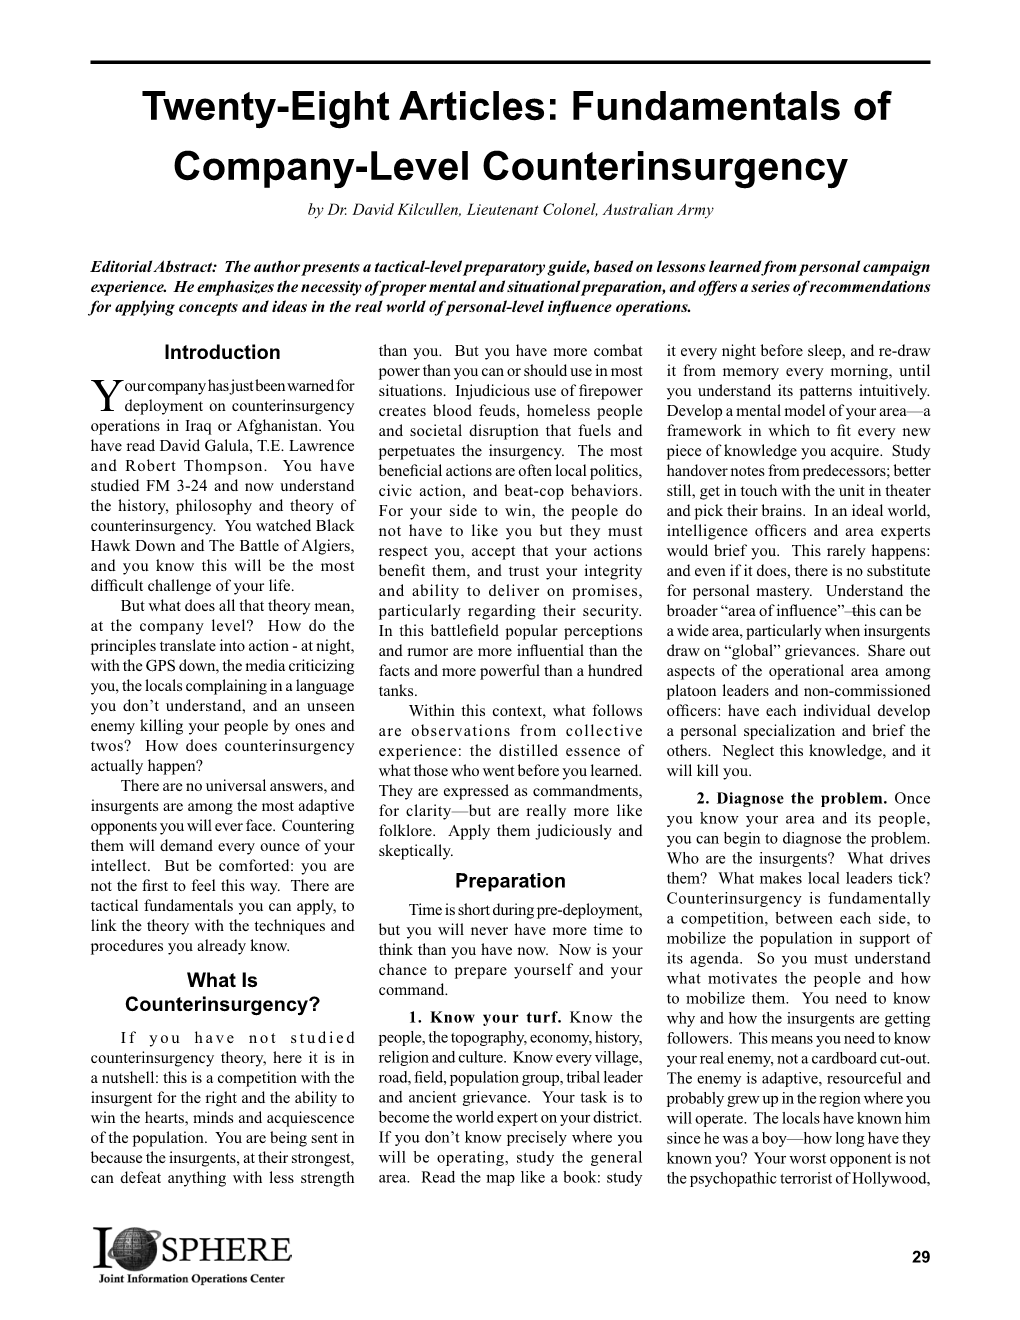 Twenty-Eight Articles: Fundamentals of Company-Level Counterinsurgency by Dr